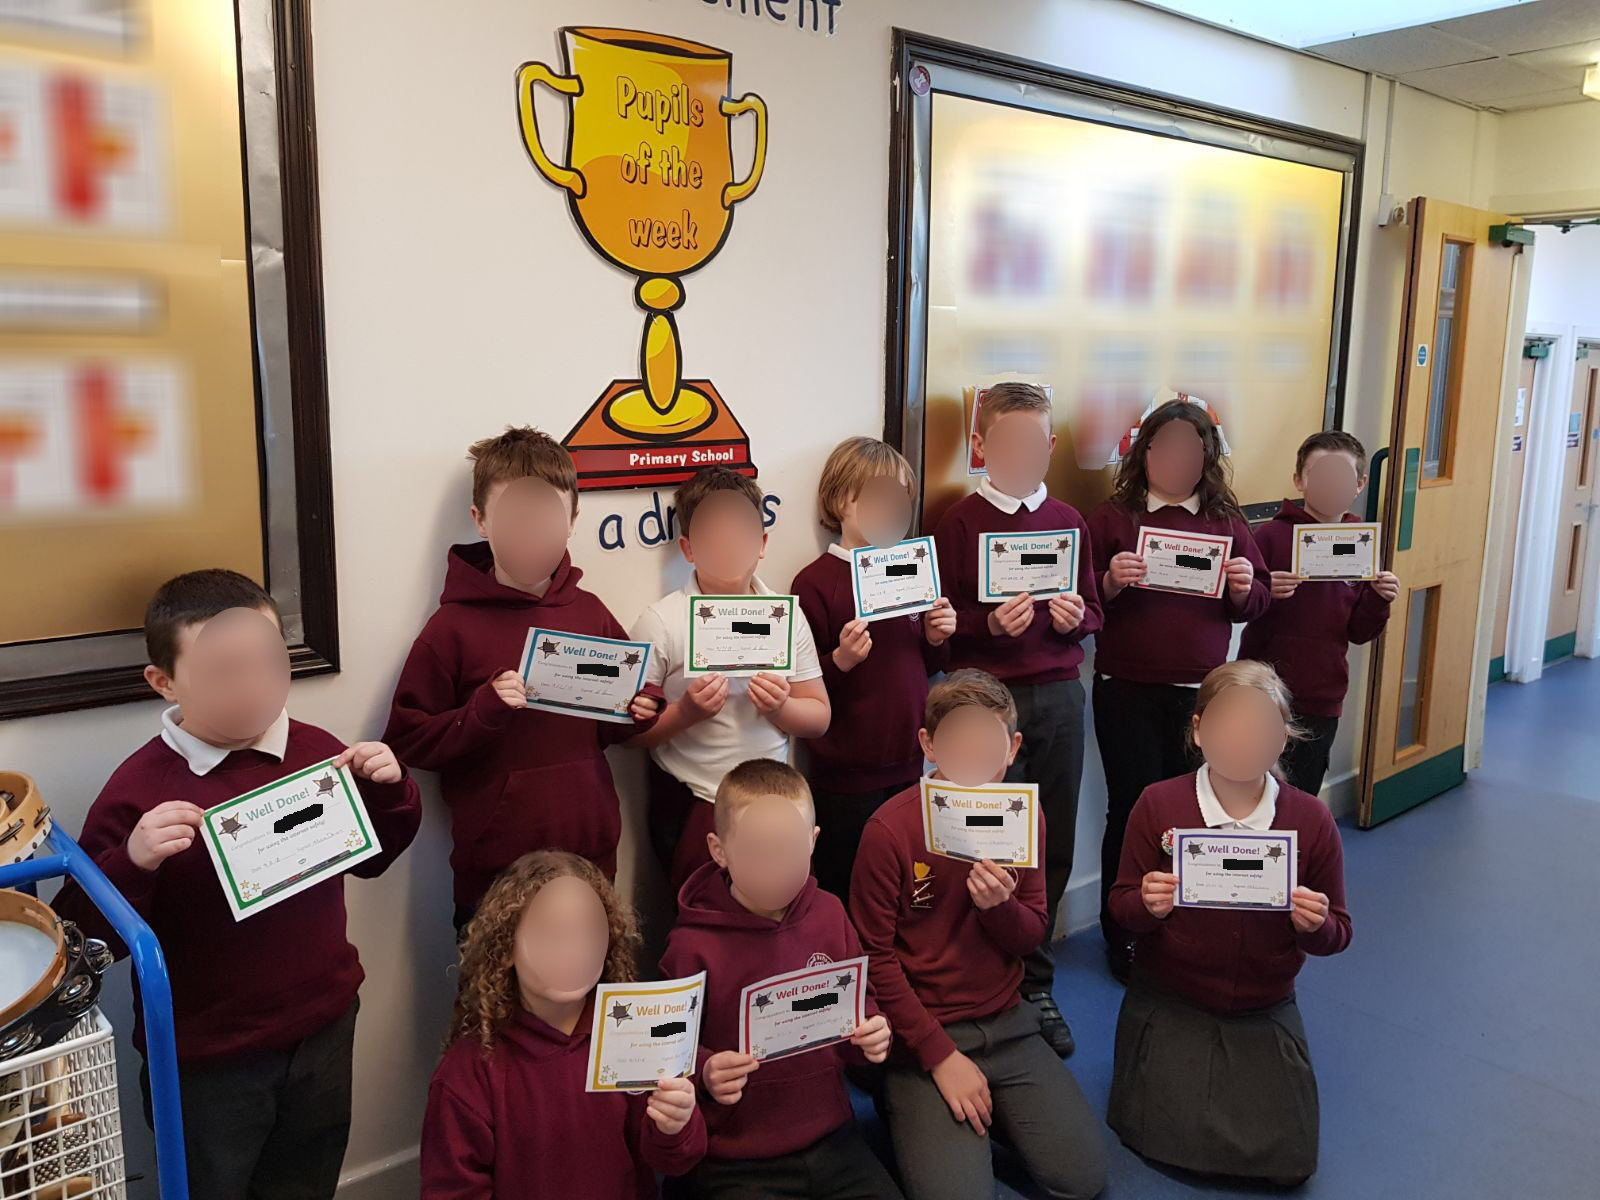 A class of school children holding up certificates for using the internet safely